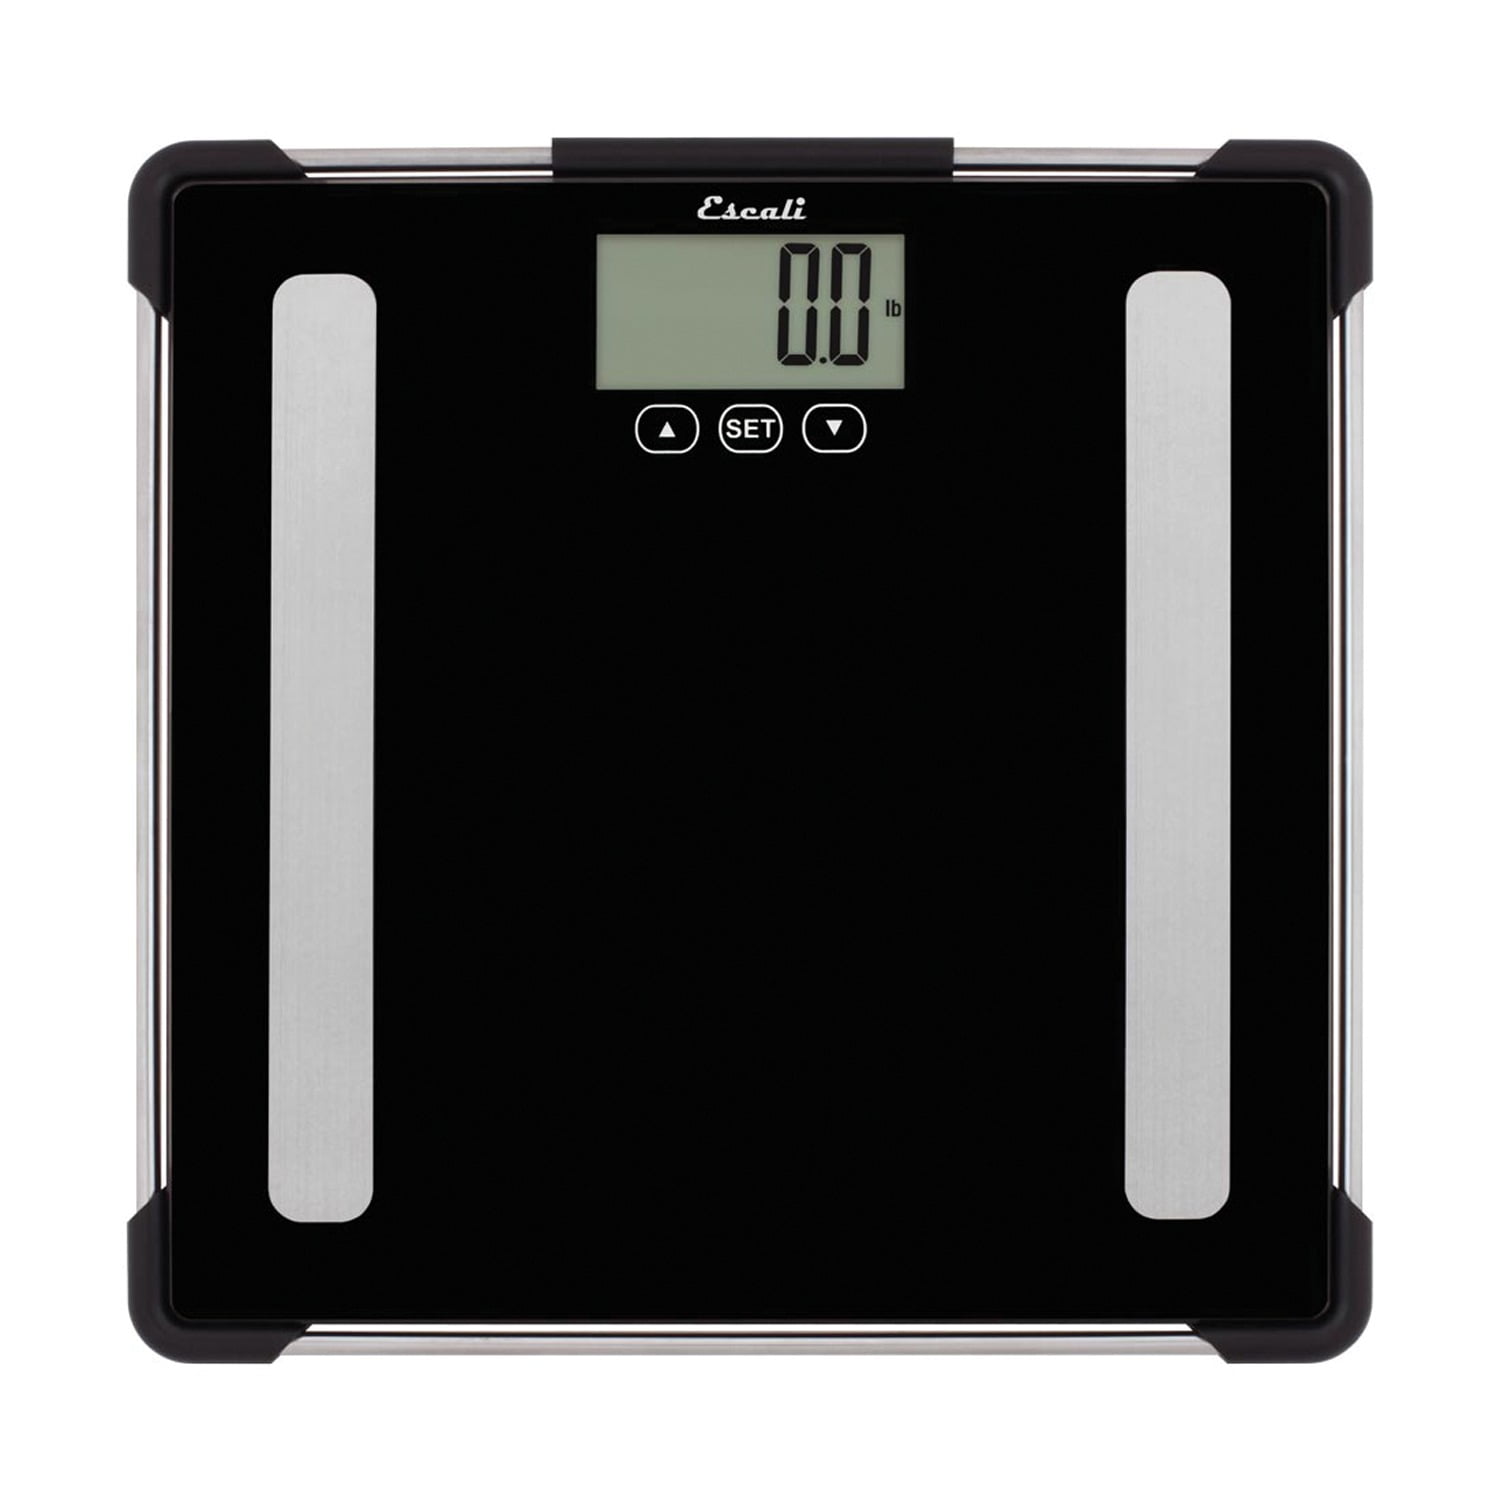 Escali BFBW200 Advanced Bioelectrical Impedance Analysis (BIA) Technology  Calculates Body Fat/Water Percentages, Bathroom Scale, LCD Digital Display